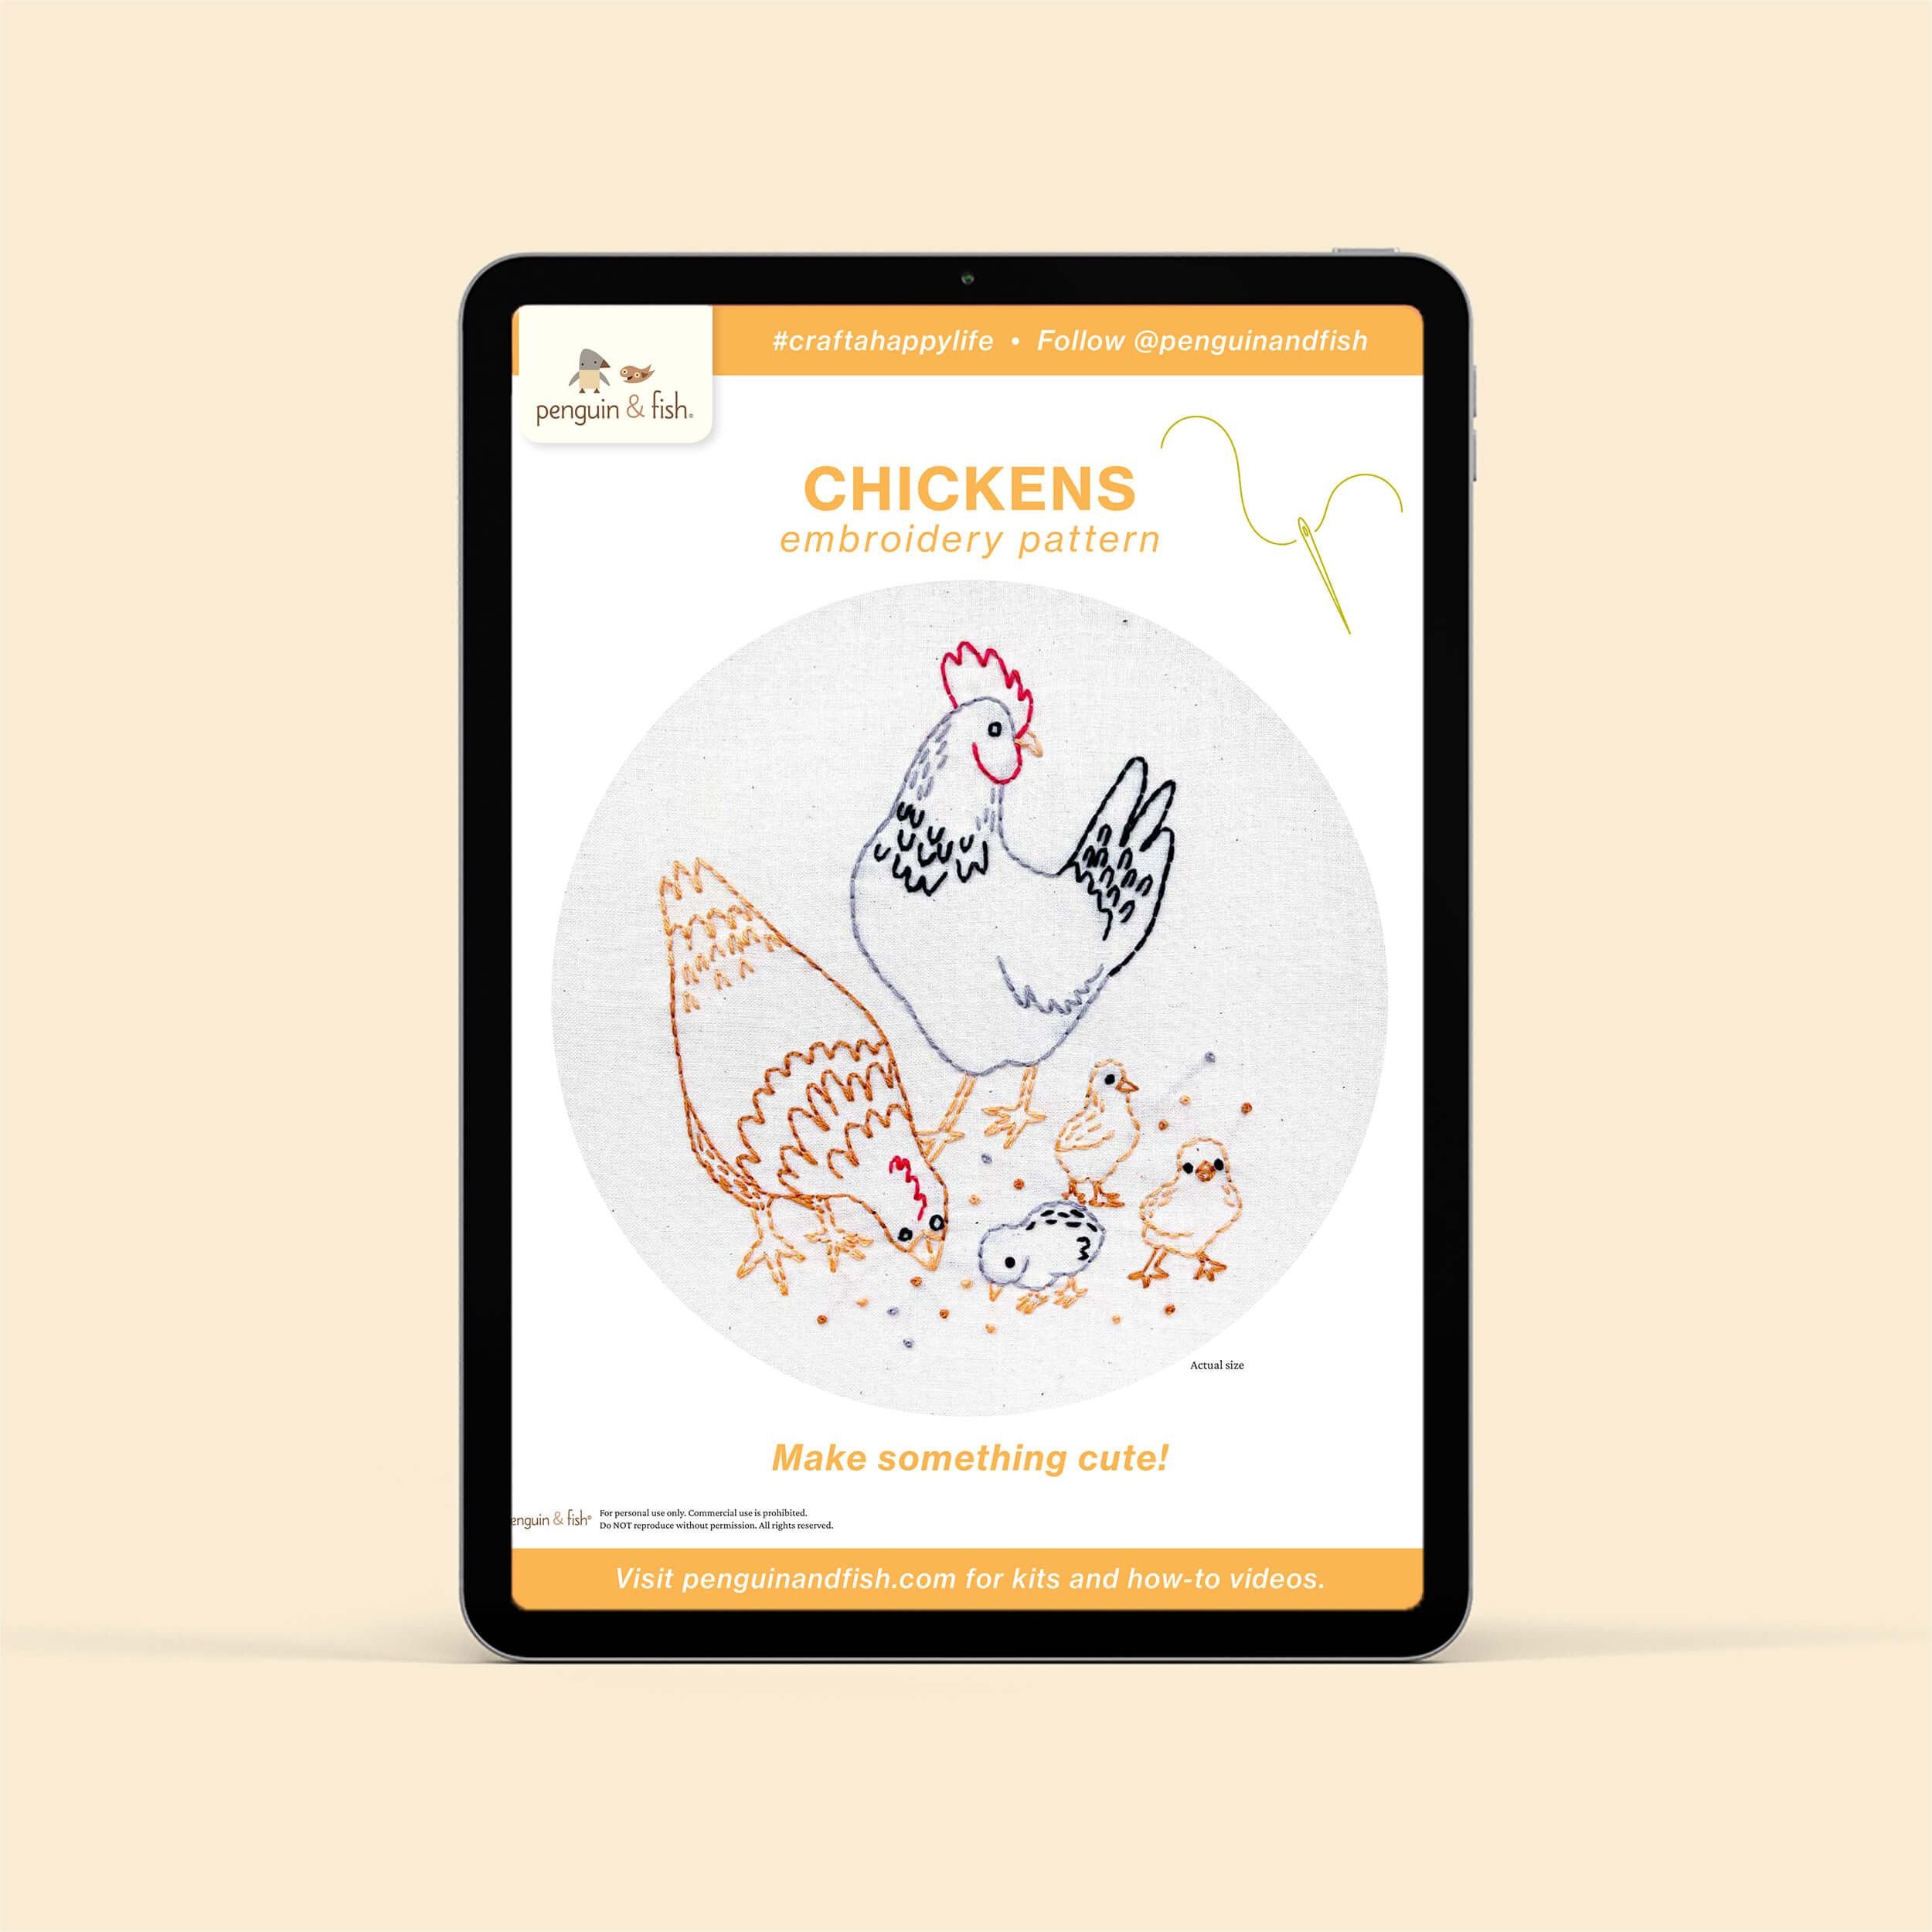 Chickesn PDF embroidery pattern shown on a tablet